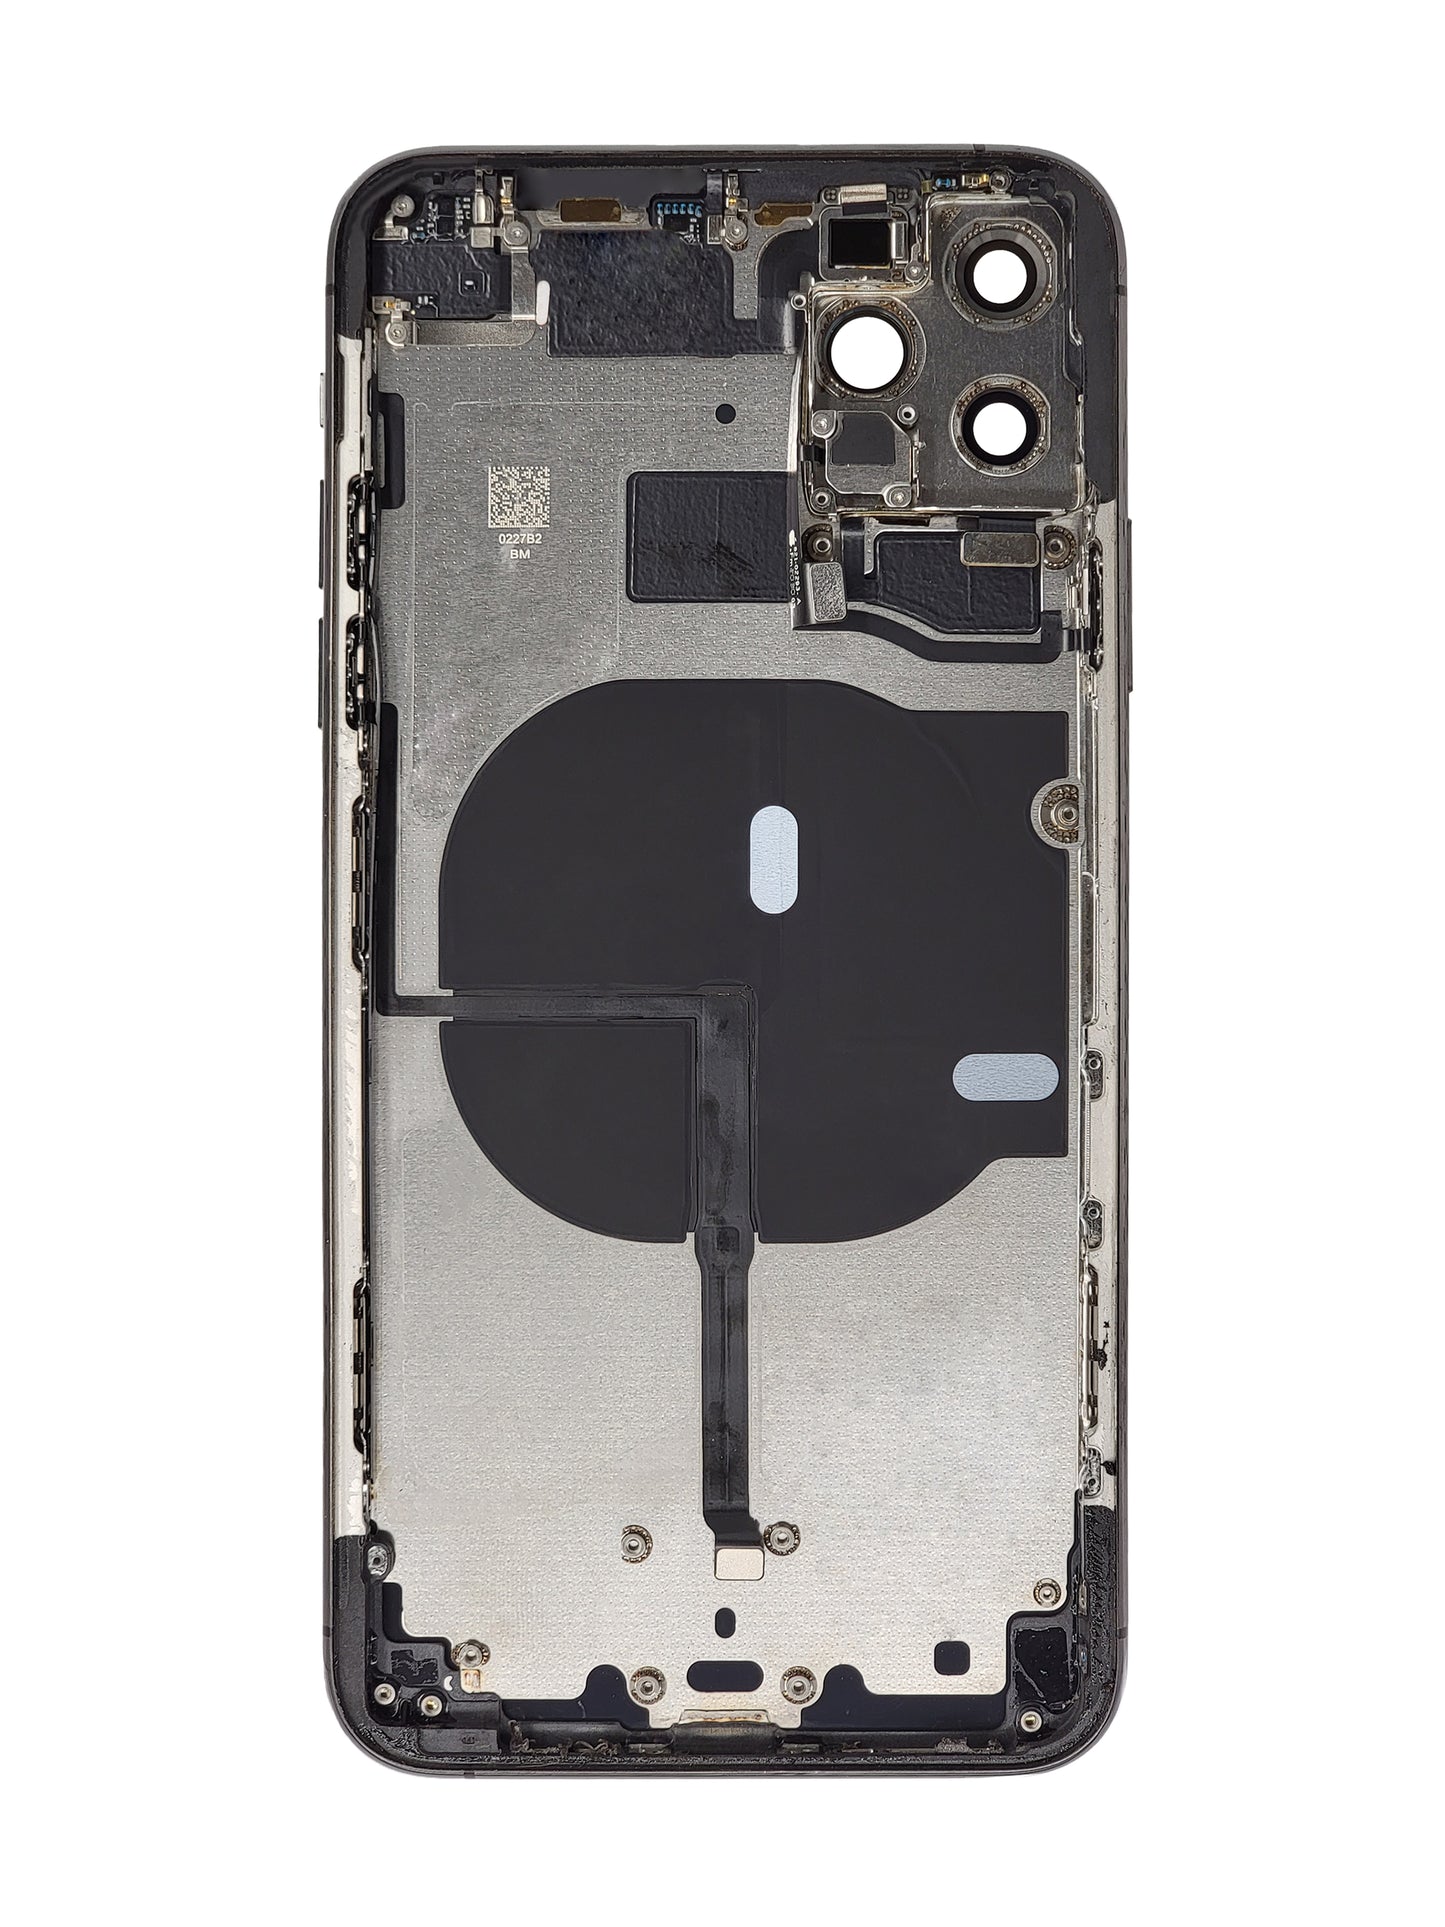 iPhone 11 Pro Max Housing (Pull Grade A) (Gray)